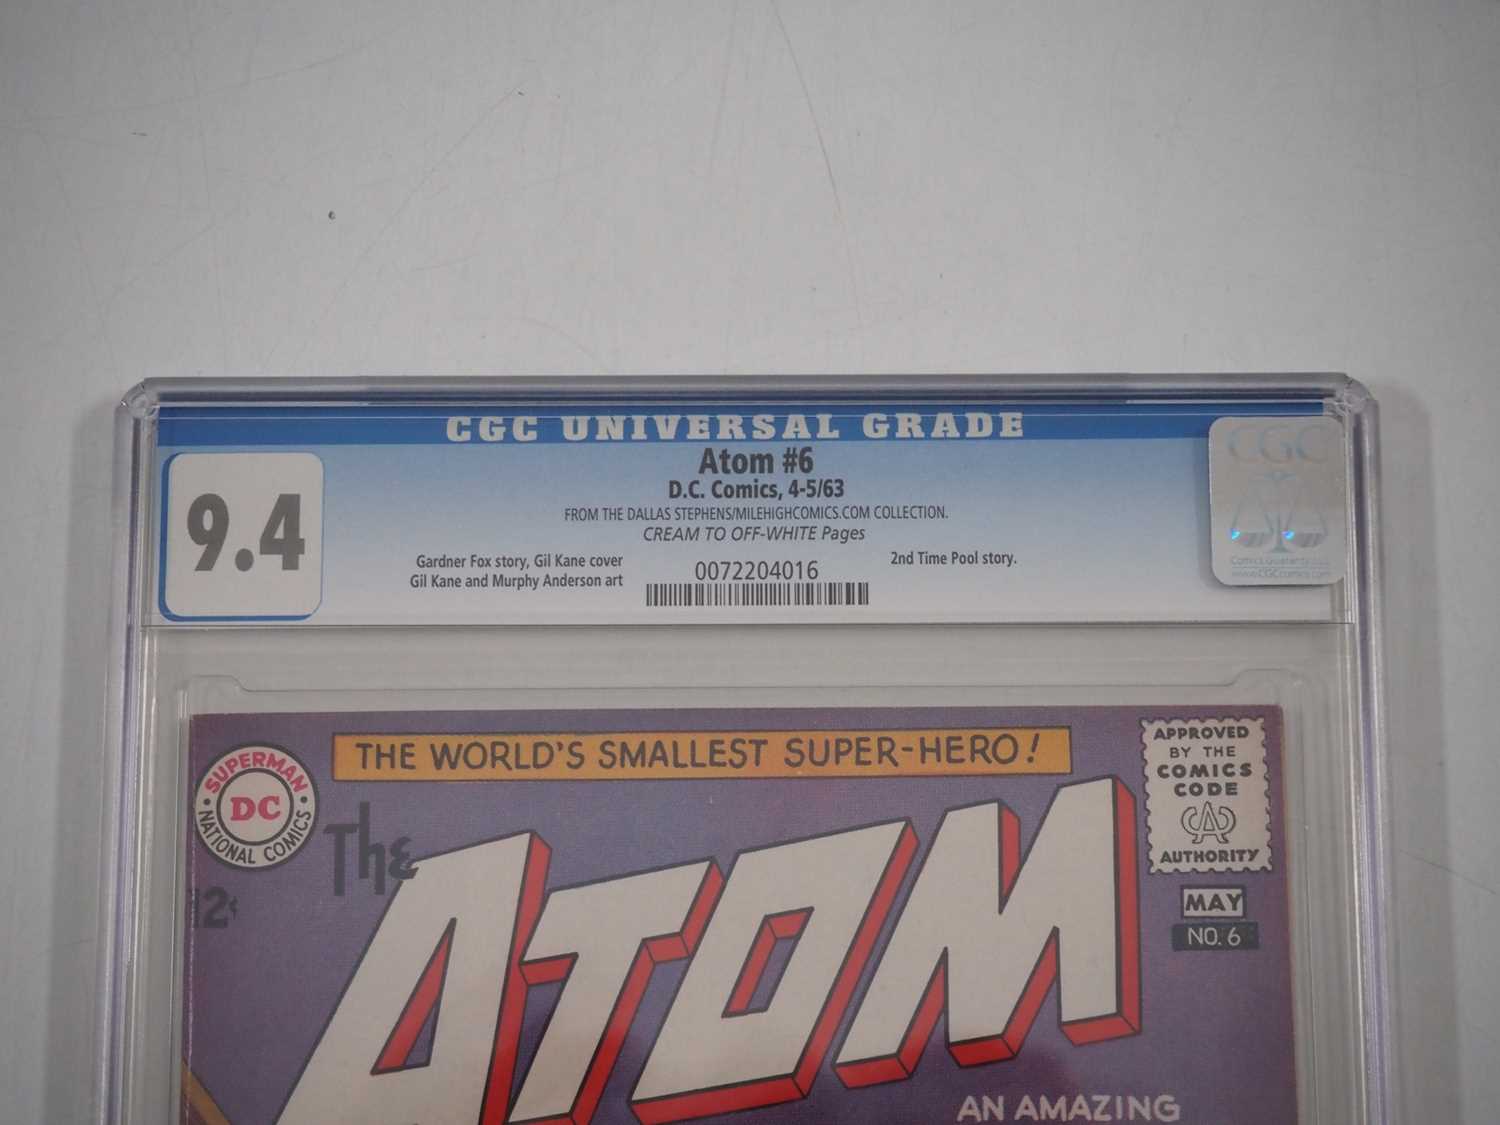 ATOM #6 (1963 - DC) - GRADED 9.4 (NM) by CGC - DALLAS STEPHENS COLLECTION COPY - The second Time - Image 3 of 5